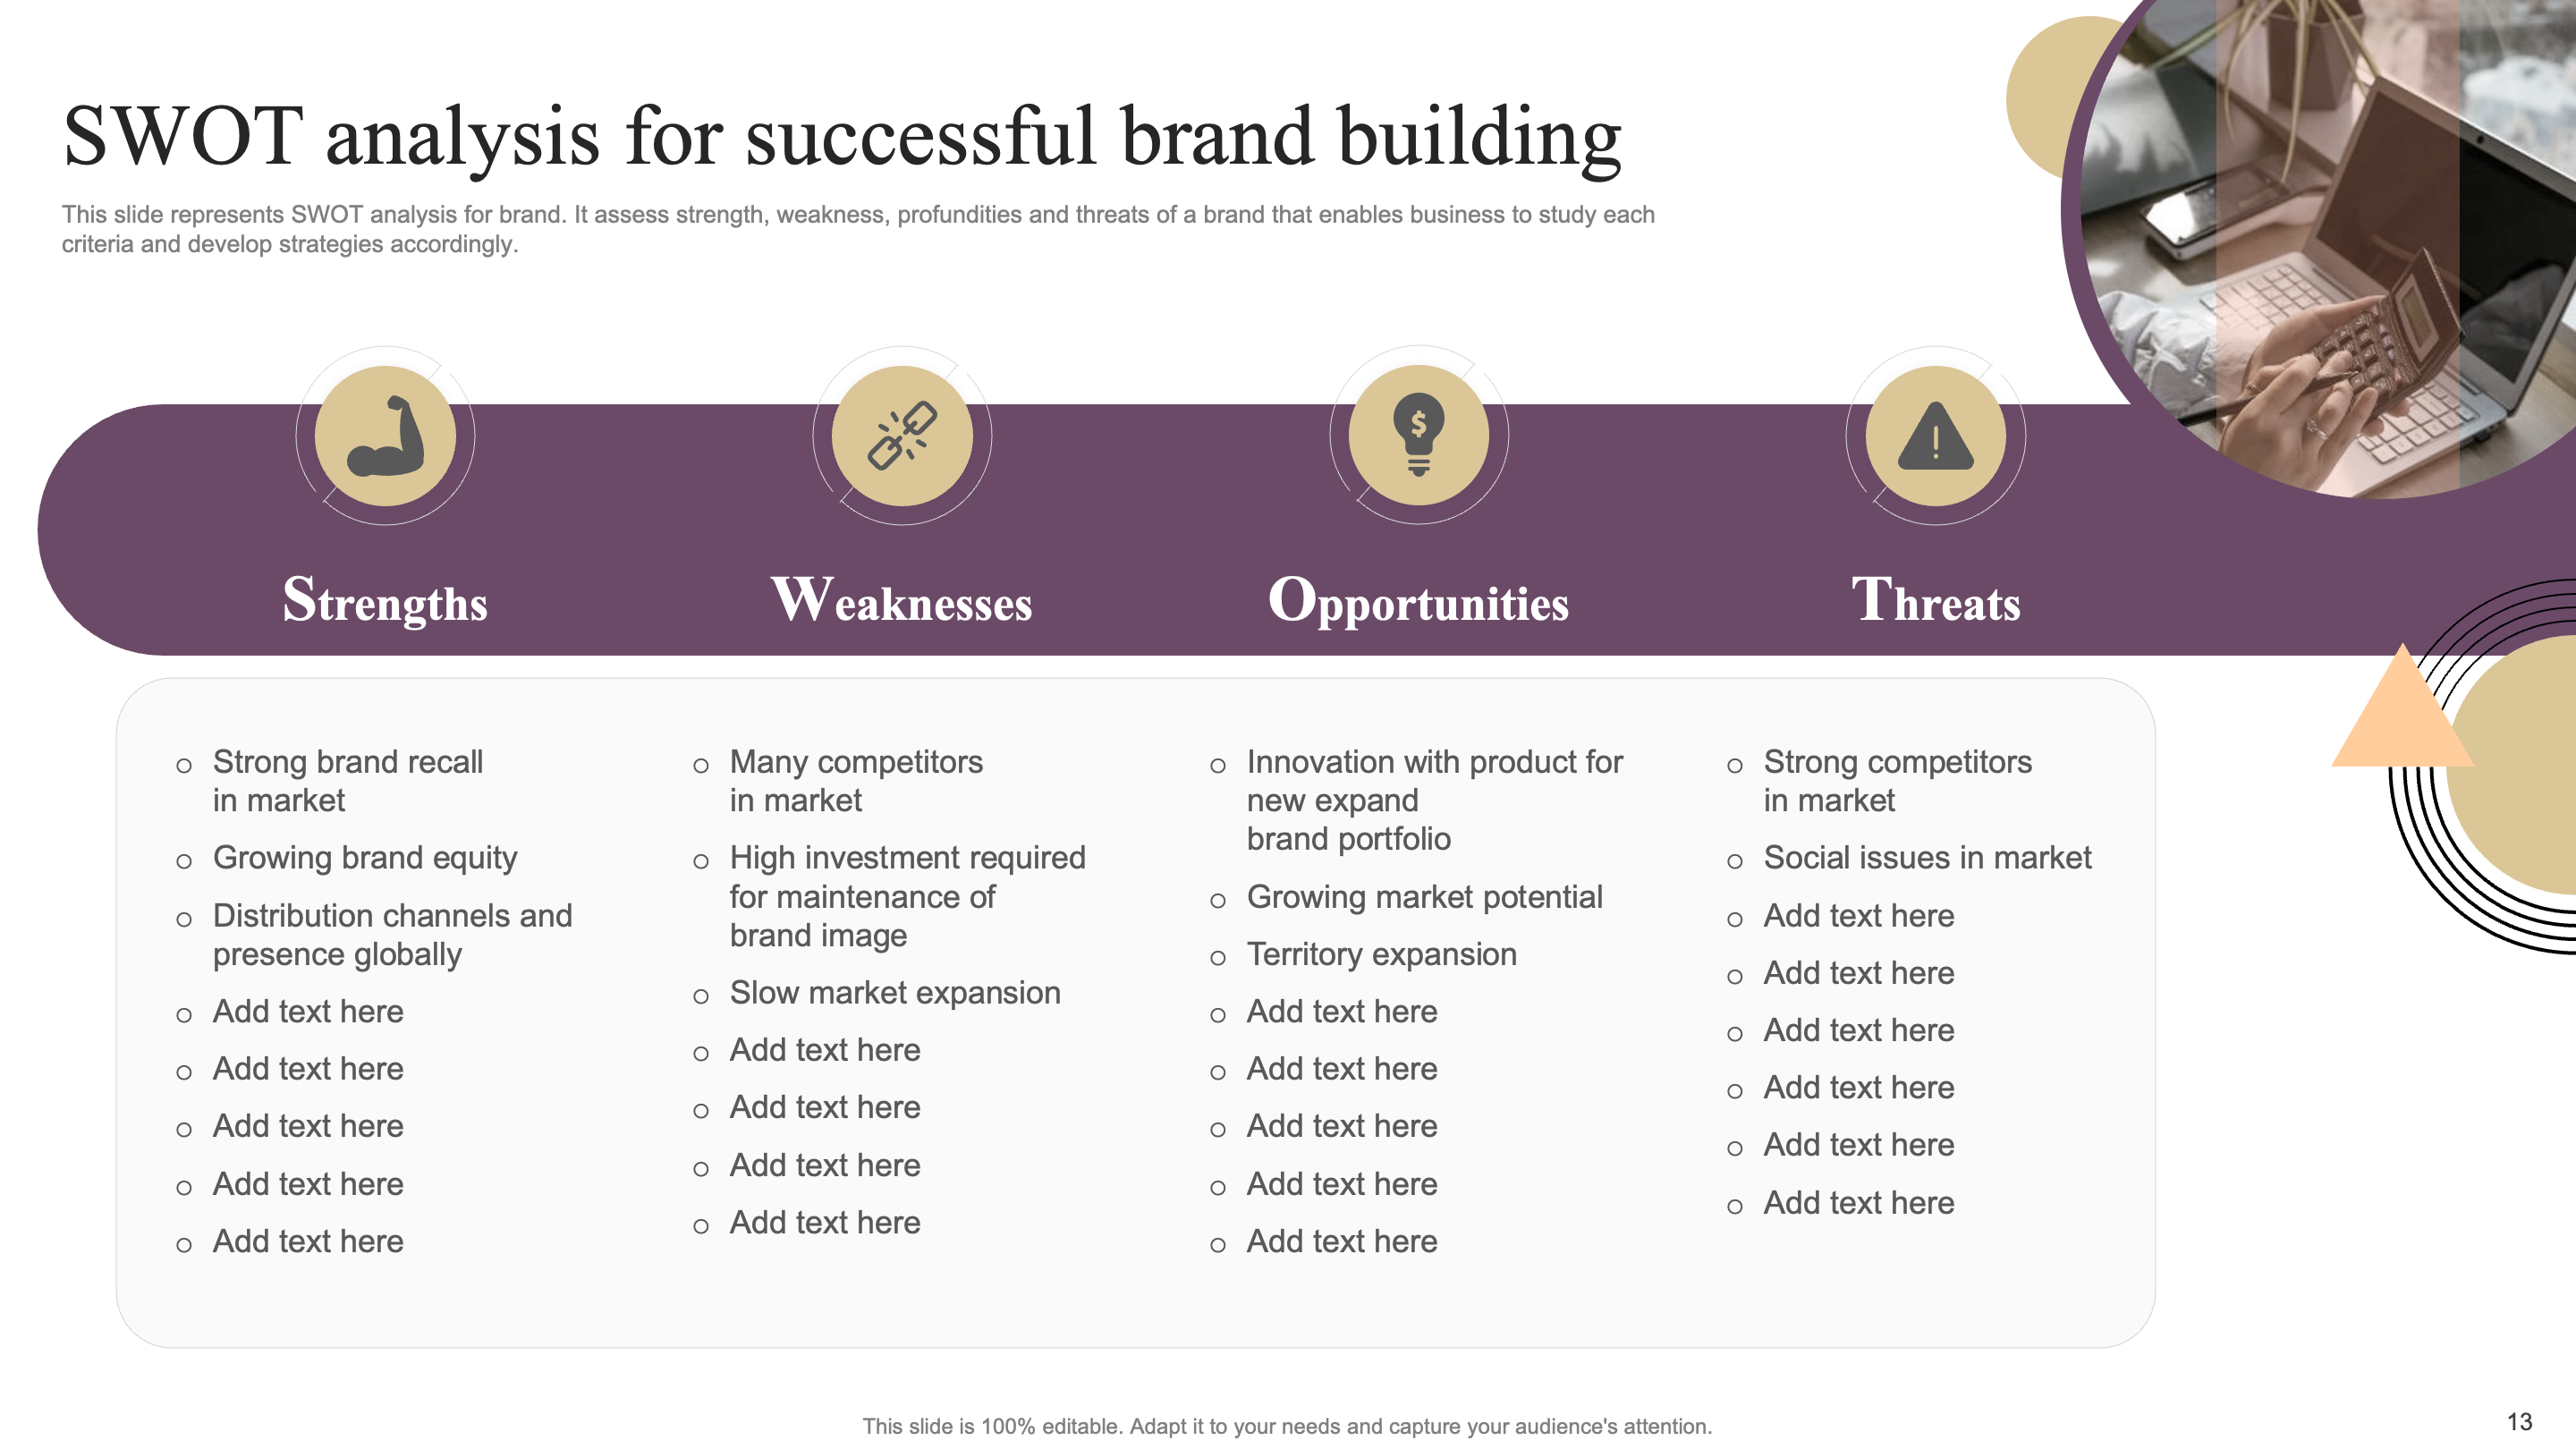 SWOT Analysis for Successful Brand Building